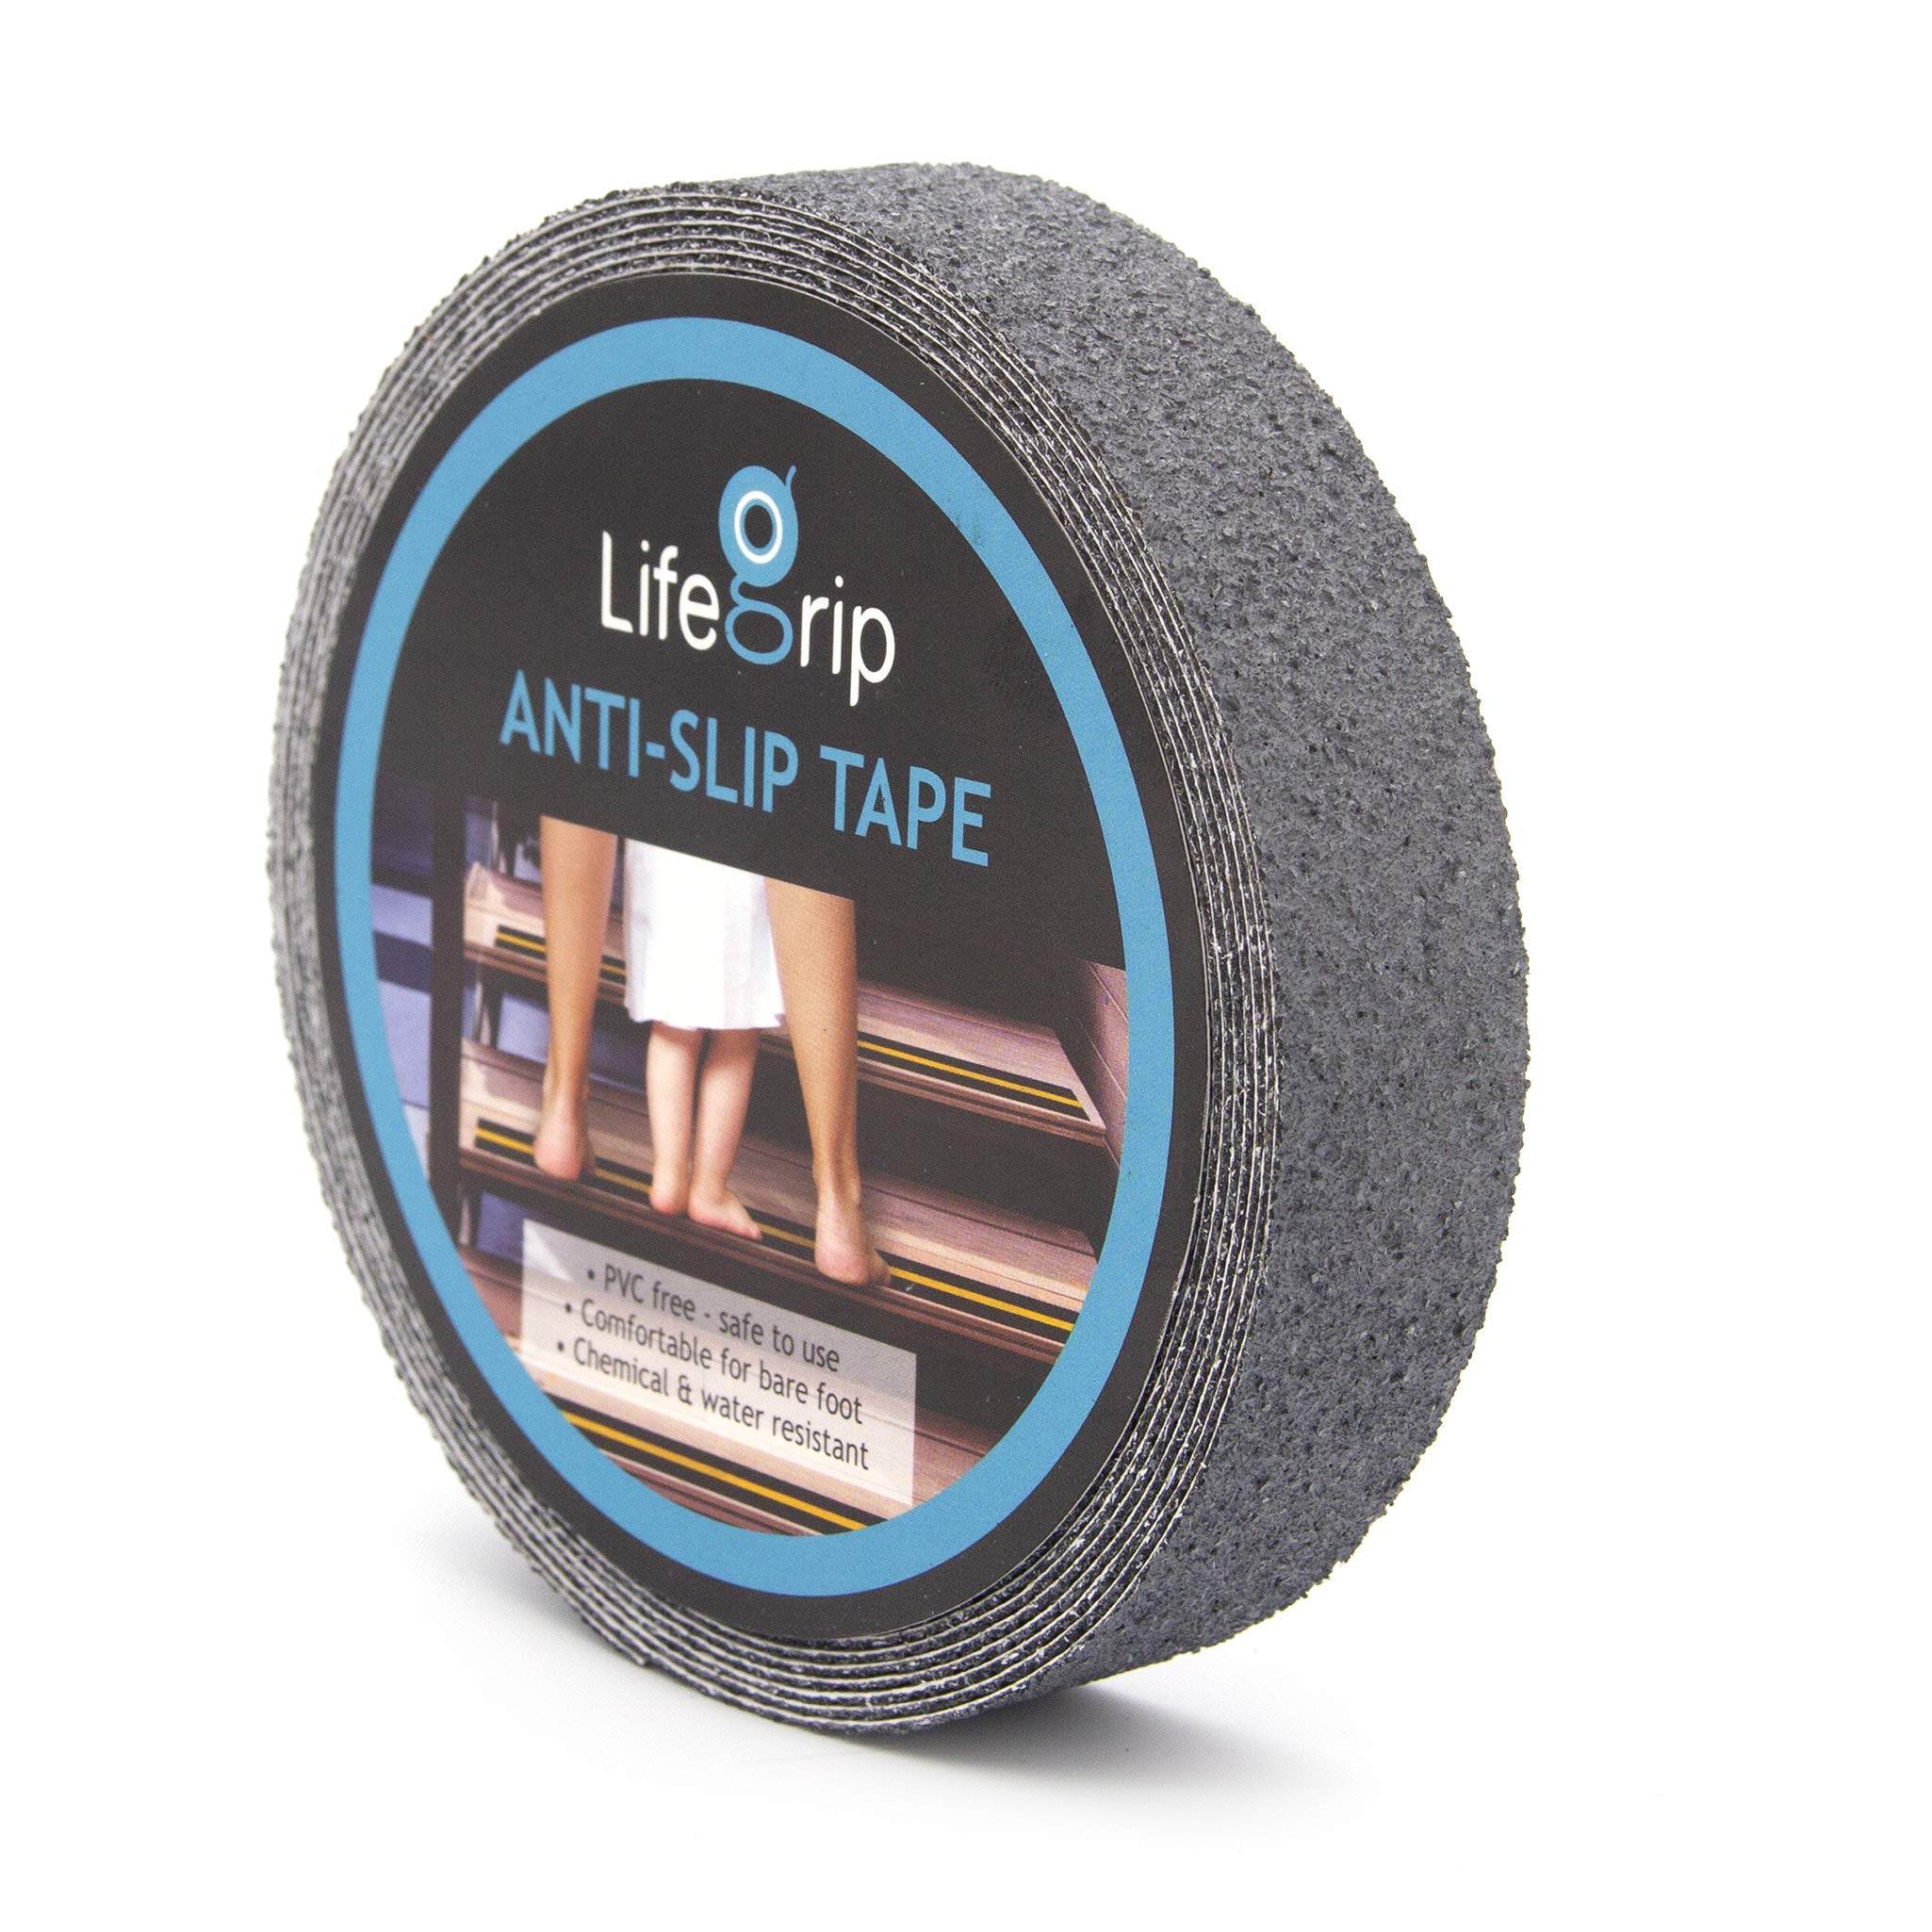 LifeGrip Stay on Track LifeGrip Anti Slip Safety Tape, Non Slip Stair Tread, Textured Rubber Surface, Comfortable for Barefoot, 1 inch X 30 Foot, Grey